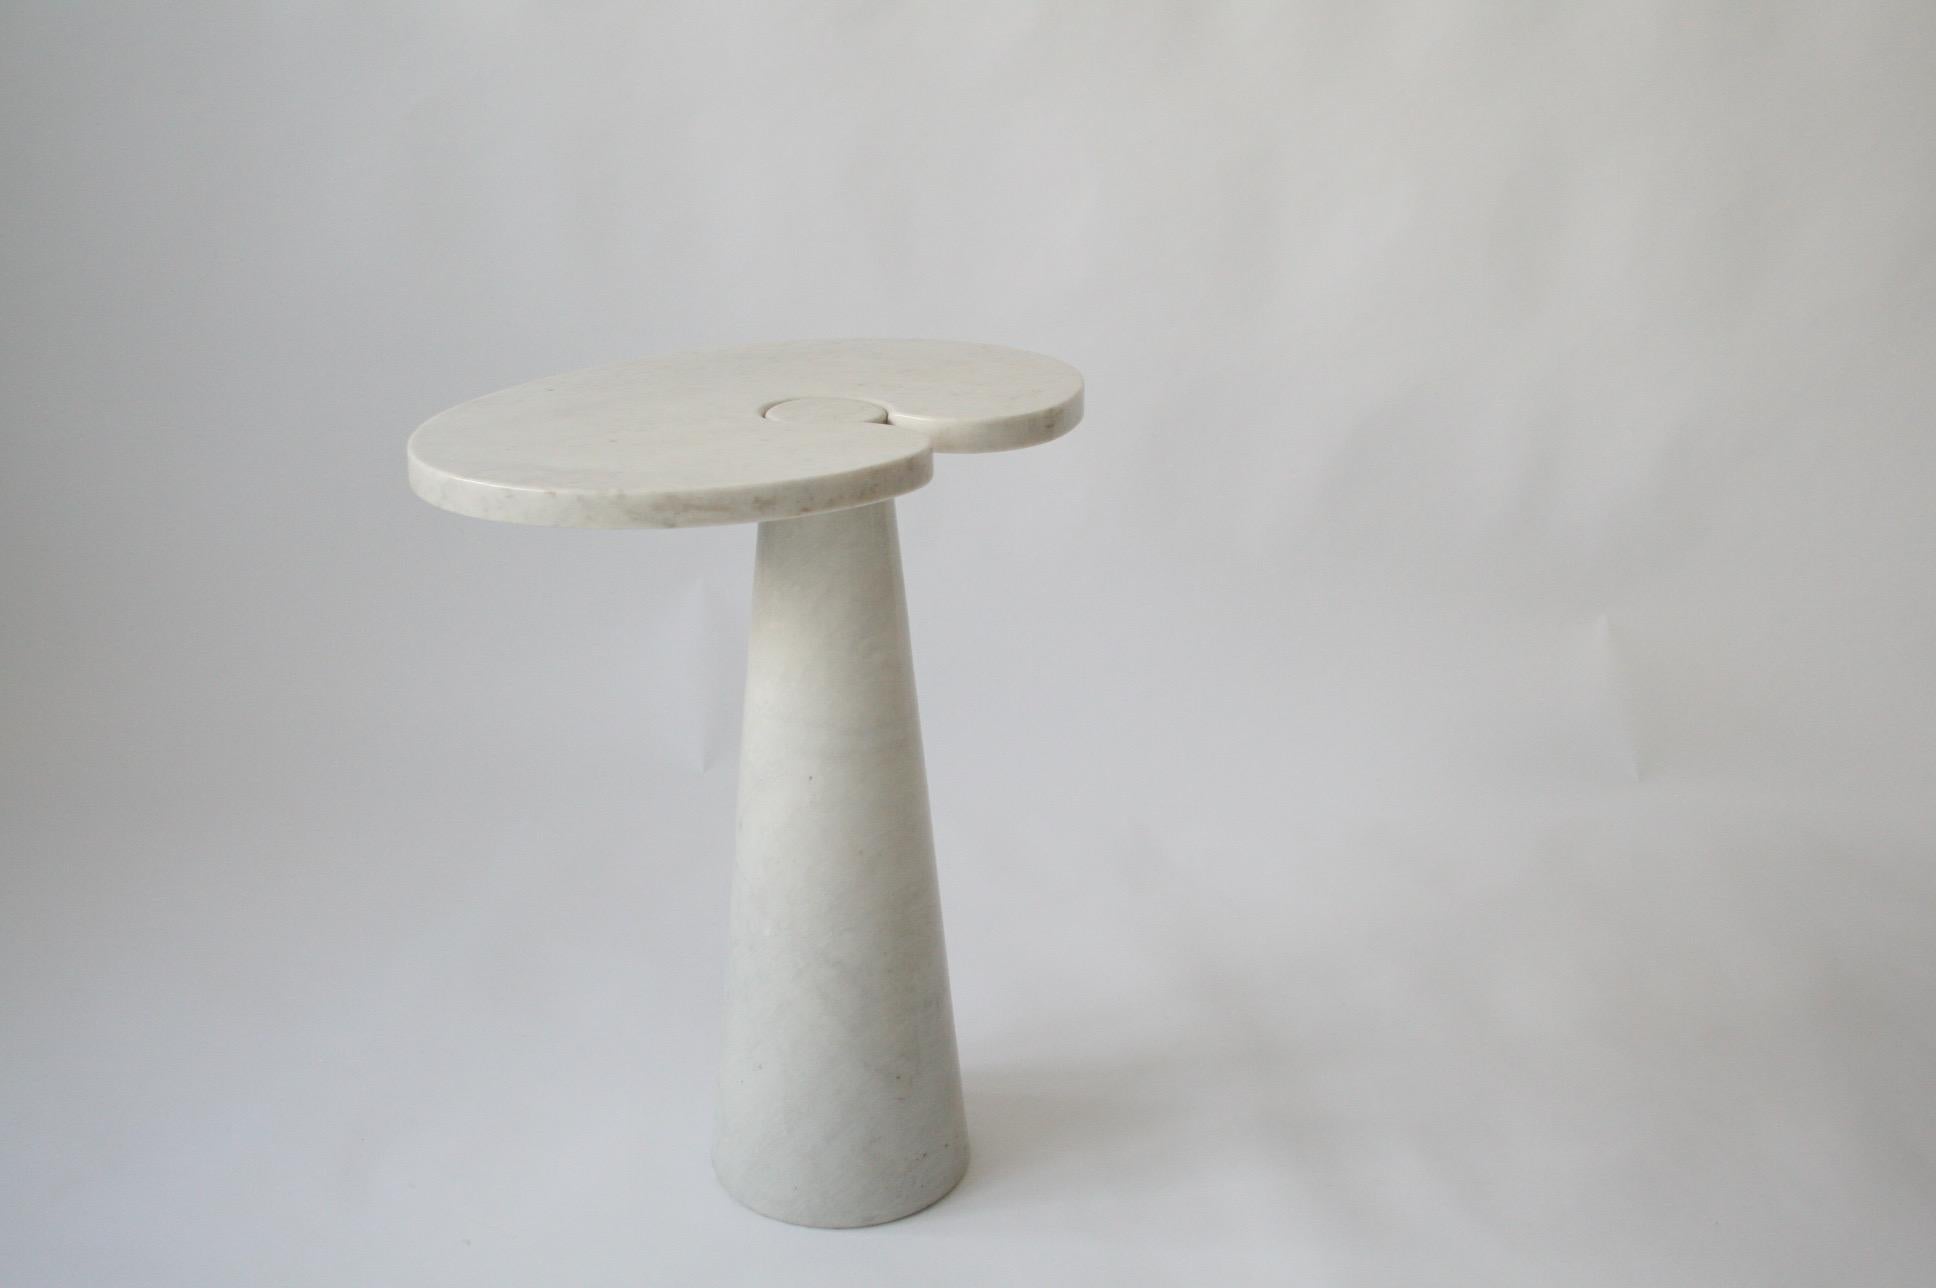 Angelo Mangiarotti Eros series for Skipper Italian white Carrara marble side table.
Eros series for Skipper. Excellent condition. Skipper, circa 1971. Vintage.

No scratches, repairs or restorations. It is more an oval than circle.

Measures: